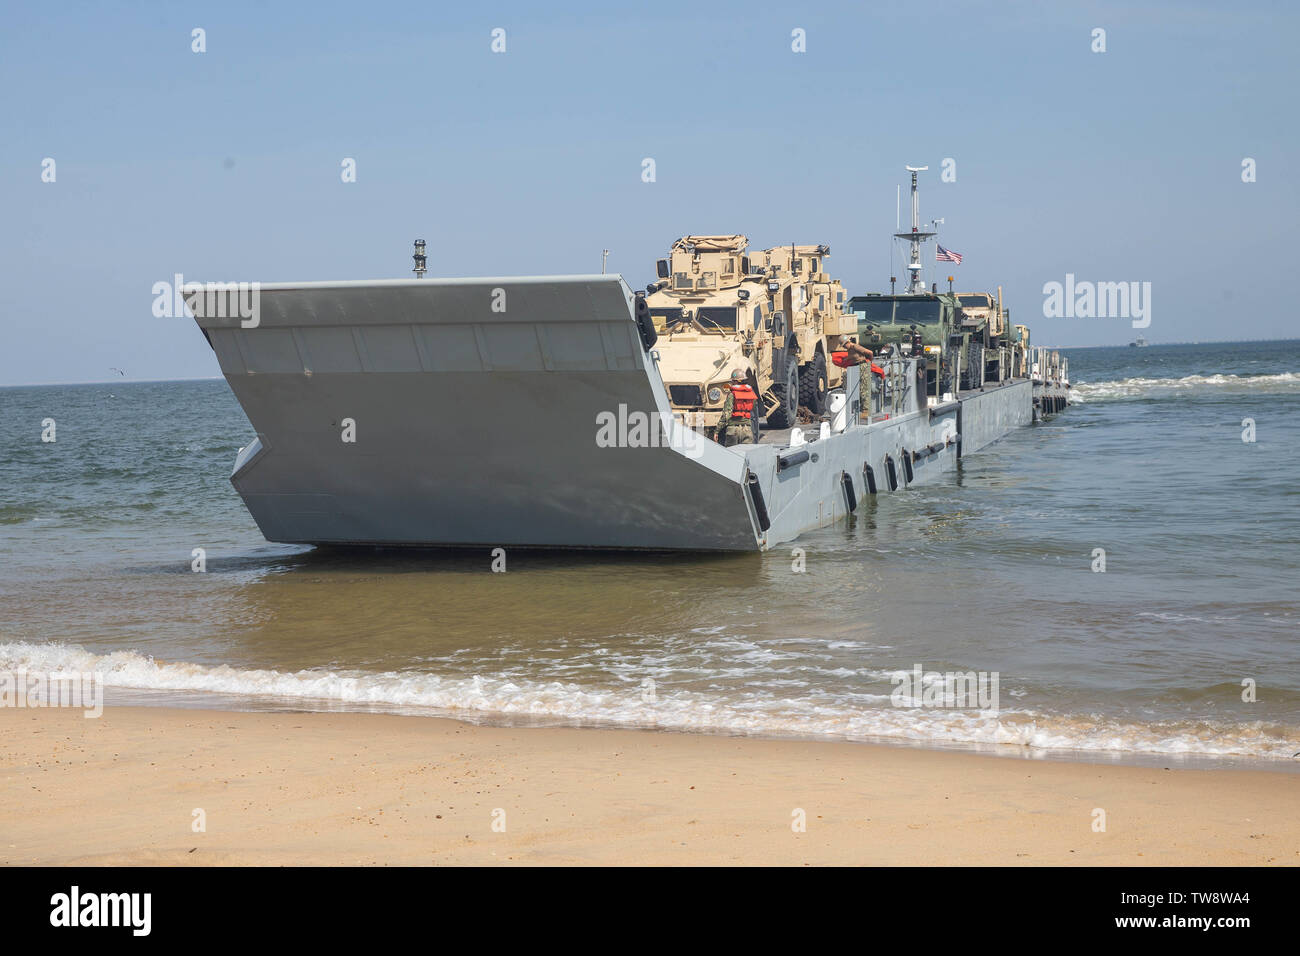 A U.S. Navy improved Navy lighterage system with Amphibious Construction Battalion 2, Naval Beach Group 2, prepares to land on shore with Marine Corps vehicles from 2nd Transportation Support Battalion, Combat Logistics Regiment 2, 2nd Marine Logistics Group during exercise Resolute Sun at Fort Story, Virginia, June 17, 2019. U.S. Marines participated in the exercise to increase combat operational readiness in amphibious and prepositioning operations while conducting joint training with U.S. Army during a joint logistics over the shore scenario. (U.S. Marine Corps photo by Lance Cpl. Scott Jen Stock Photo